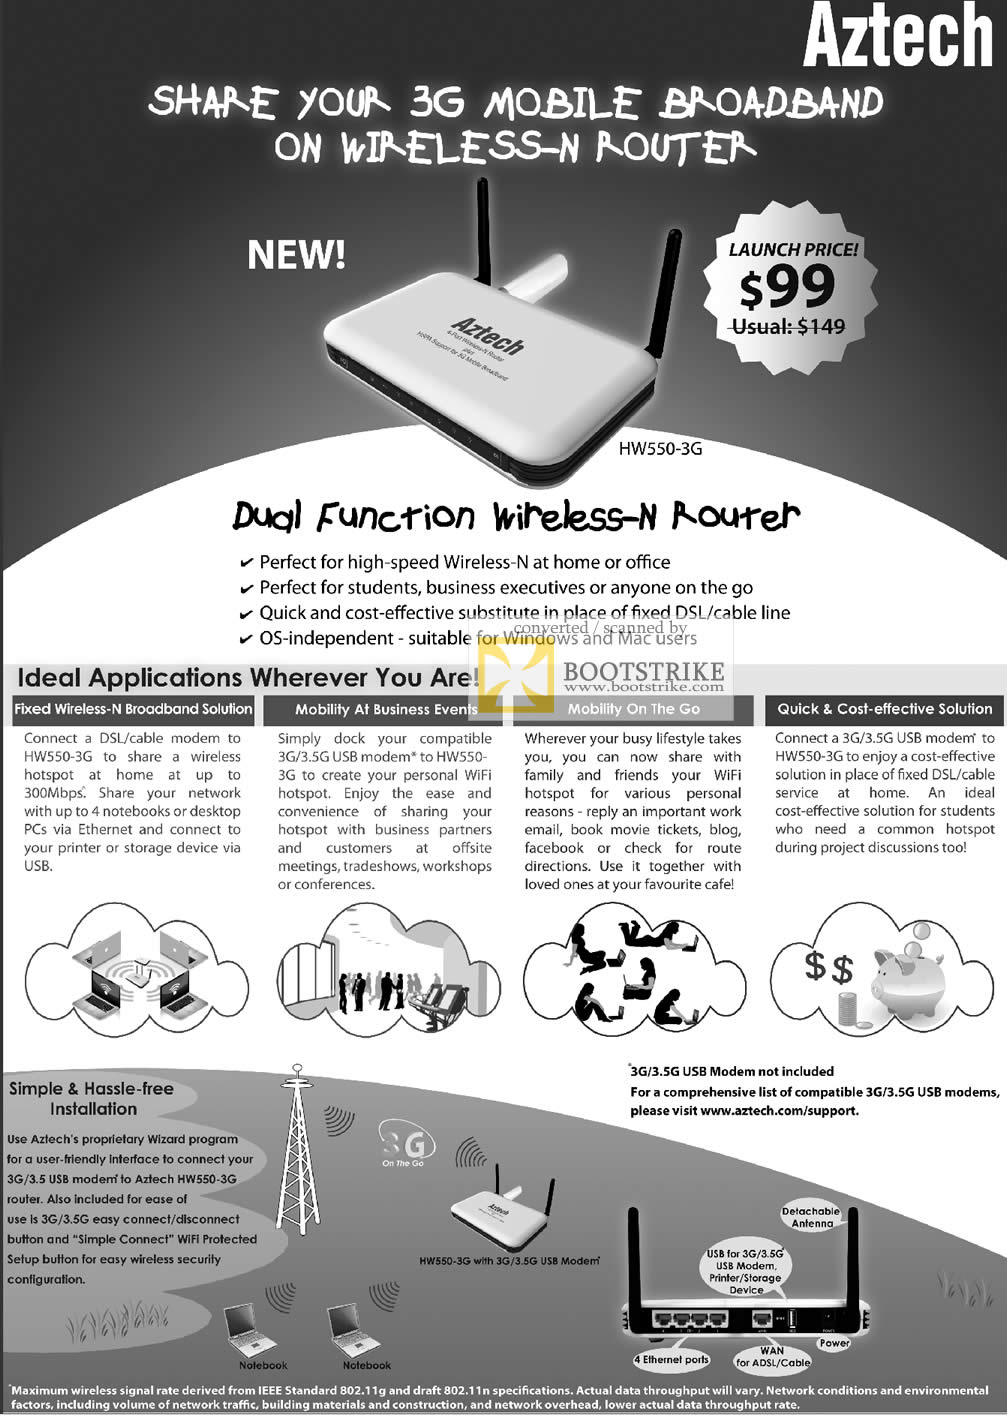 PC Show 2009 price list image brochure of Aztech Dual Function Wireless N Router HW550-3G